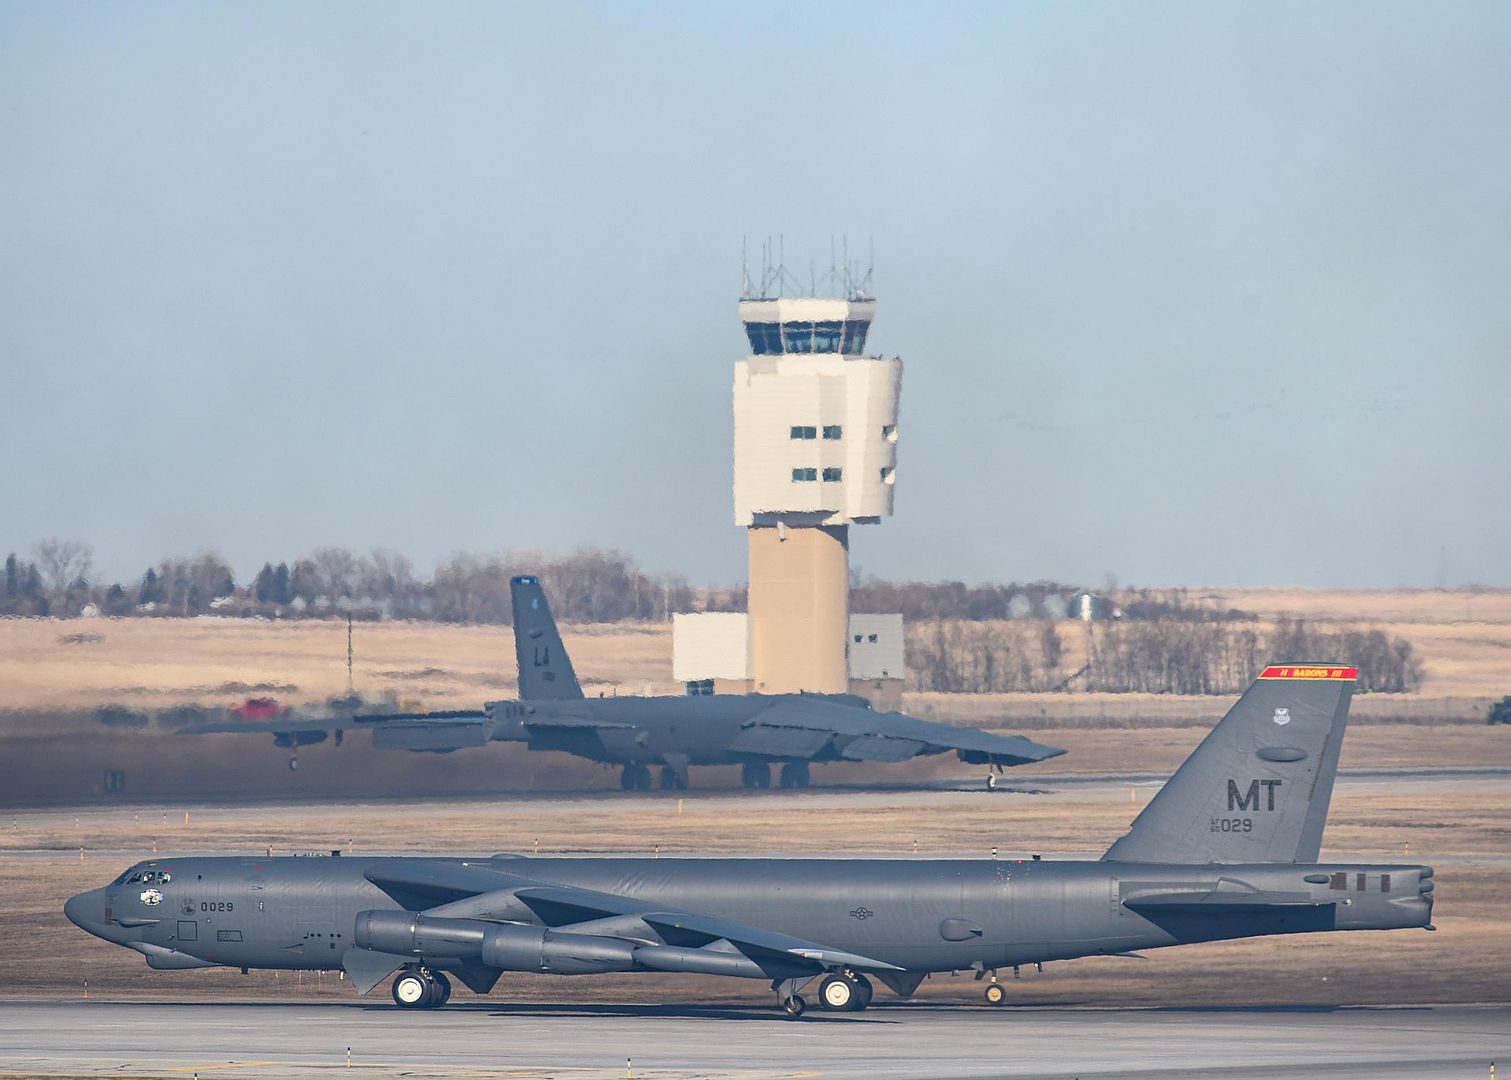 52H Stratofortresses Assigned To Team Minot S 5th Bomb Wing And The 2nd Bomb Wing At Barksdale Air Force Base Louisiana Prepare To Take Off In Support Of Global Thunder 23